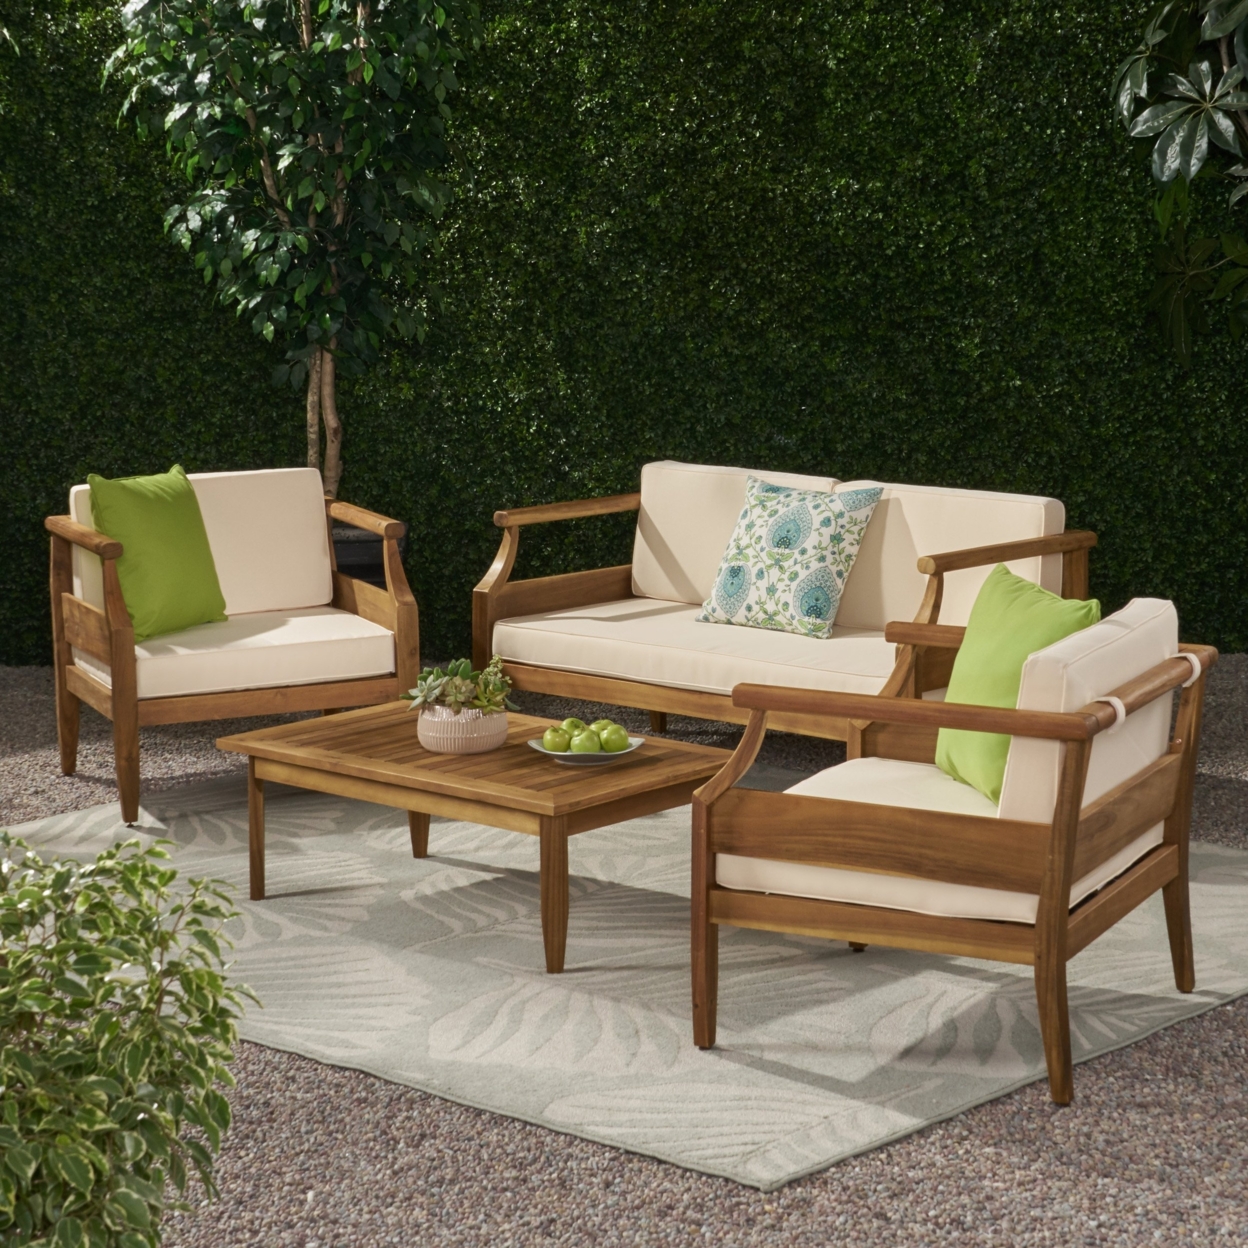 Bianca Outdoor Mid-Century Modern Acacia Wood 4 Seater Chat Set With Cushions - Dark Gray